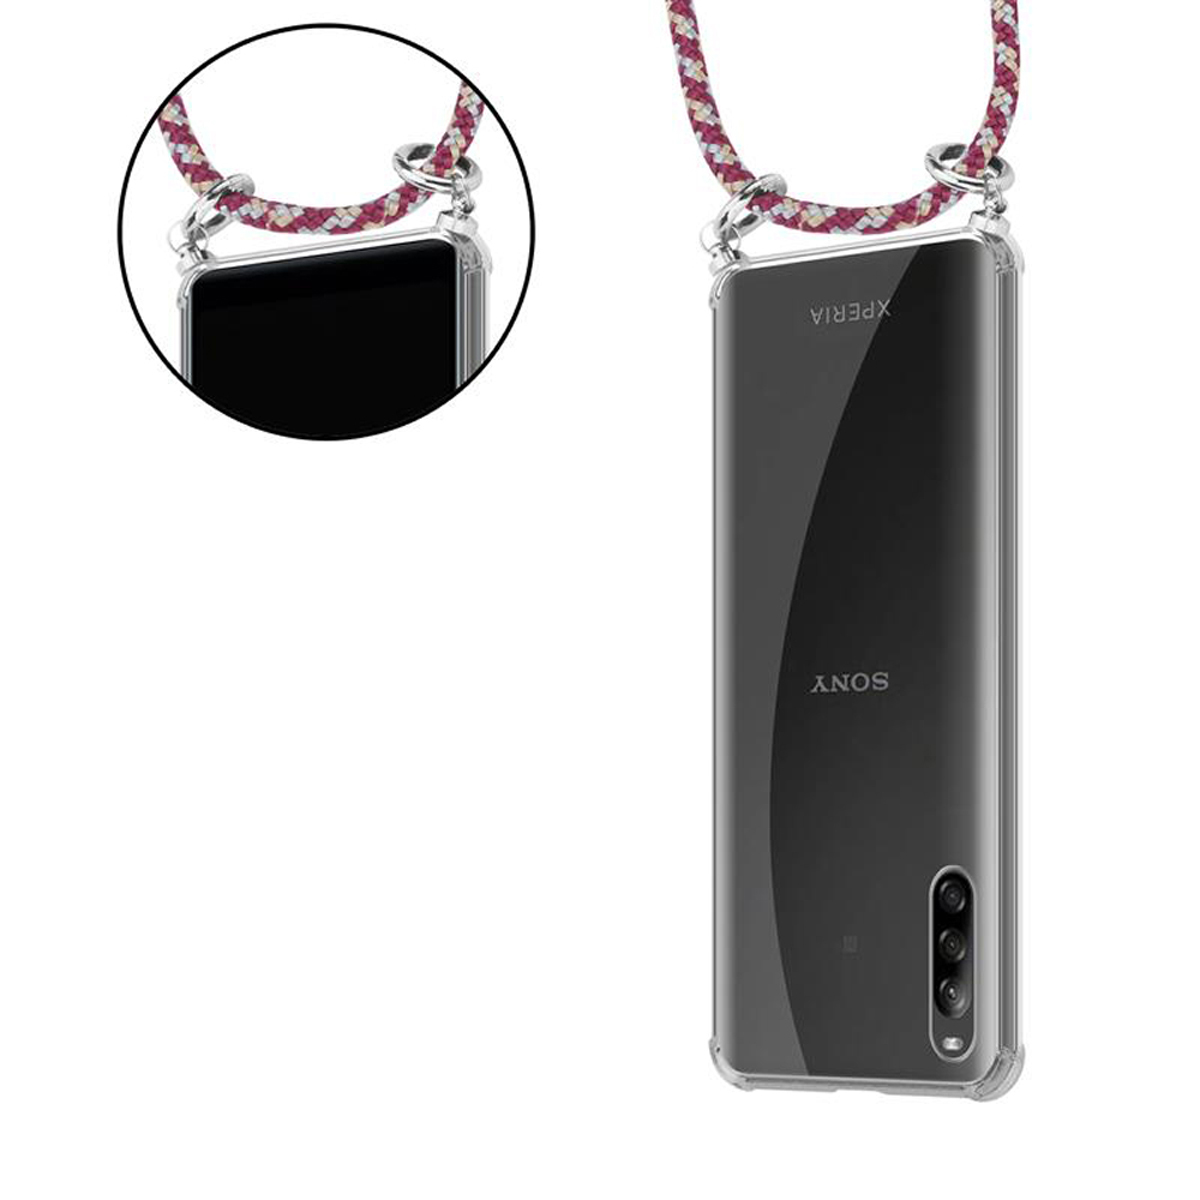 Kette abnehmbarer GELB Band und Handy WEIß ROT Ringen, Backcover, CADORABO L4, Kordel mit Sony, Xperia Hülle, Silber